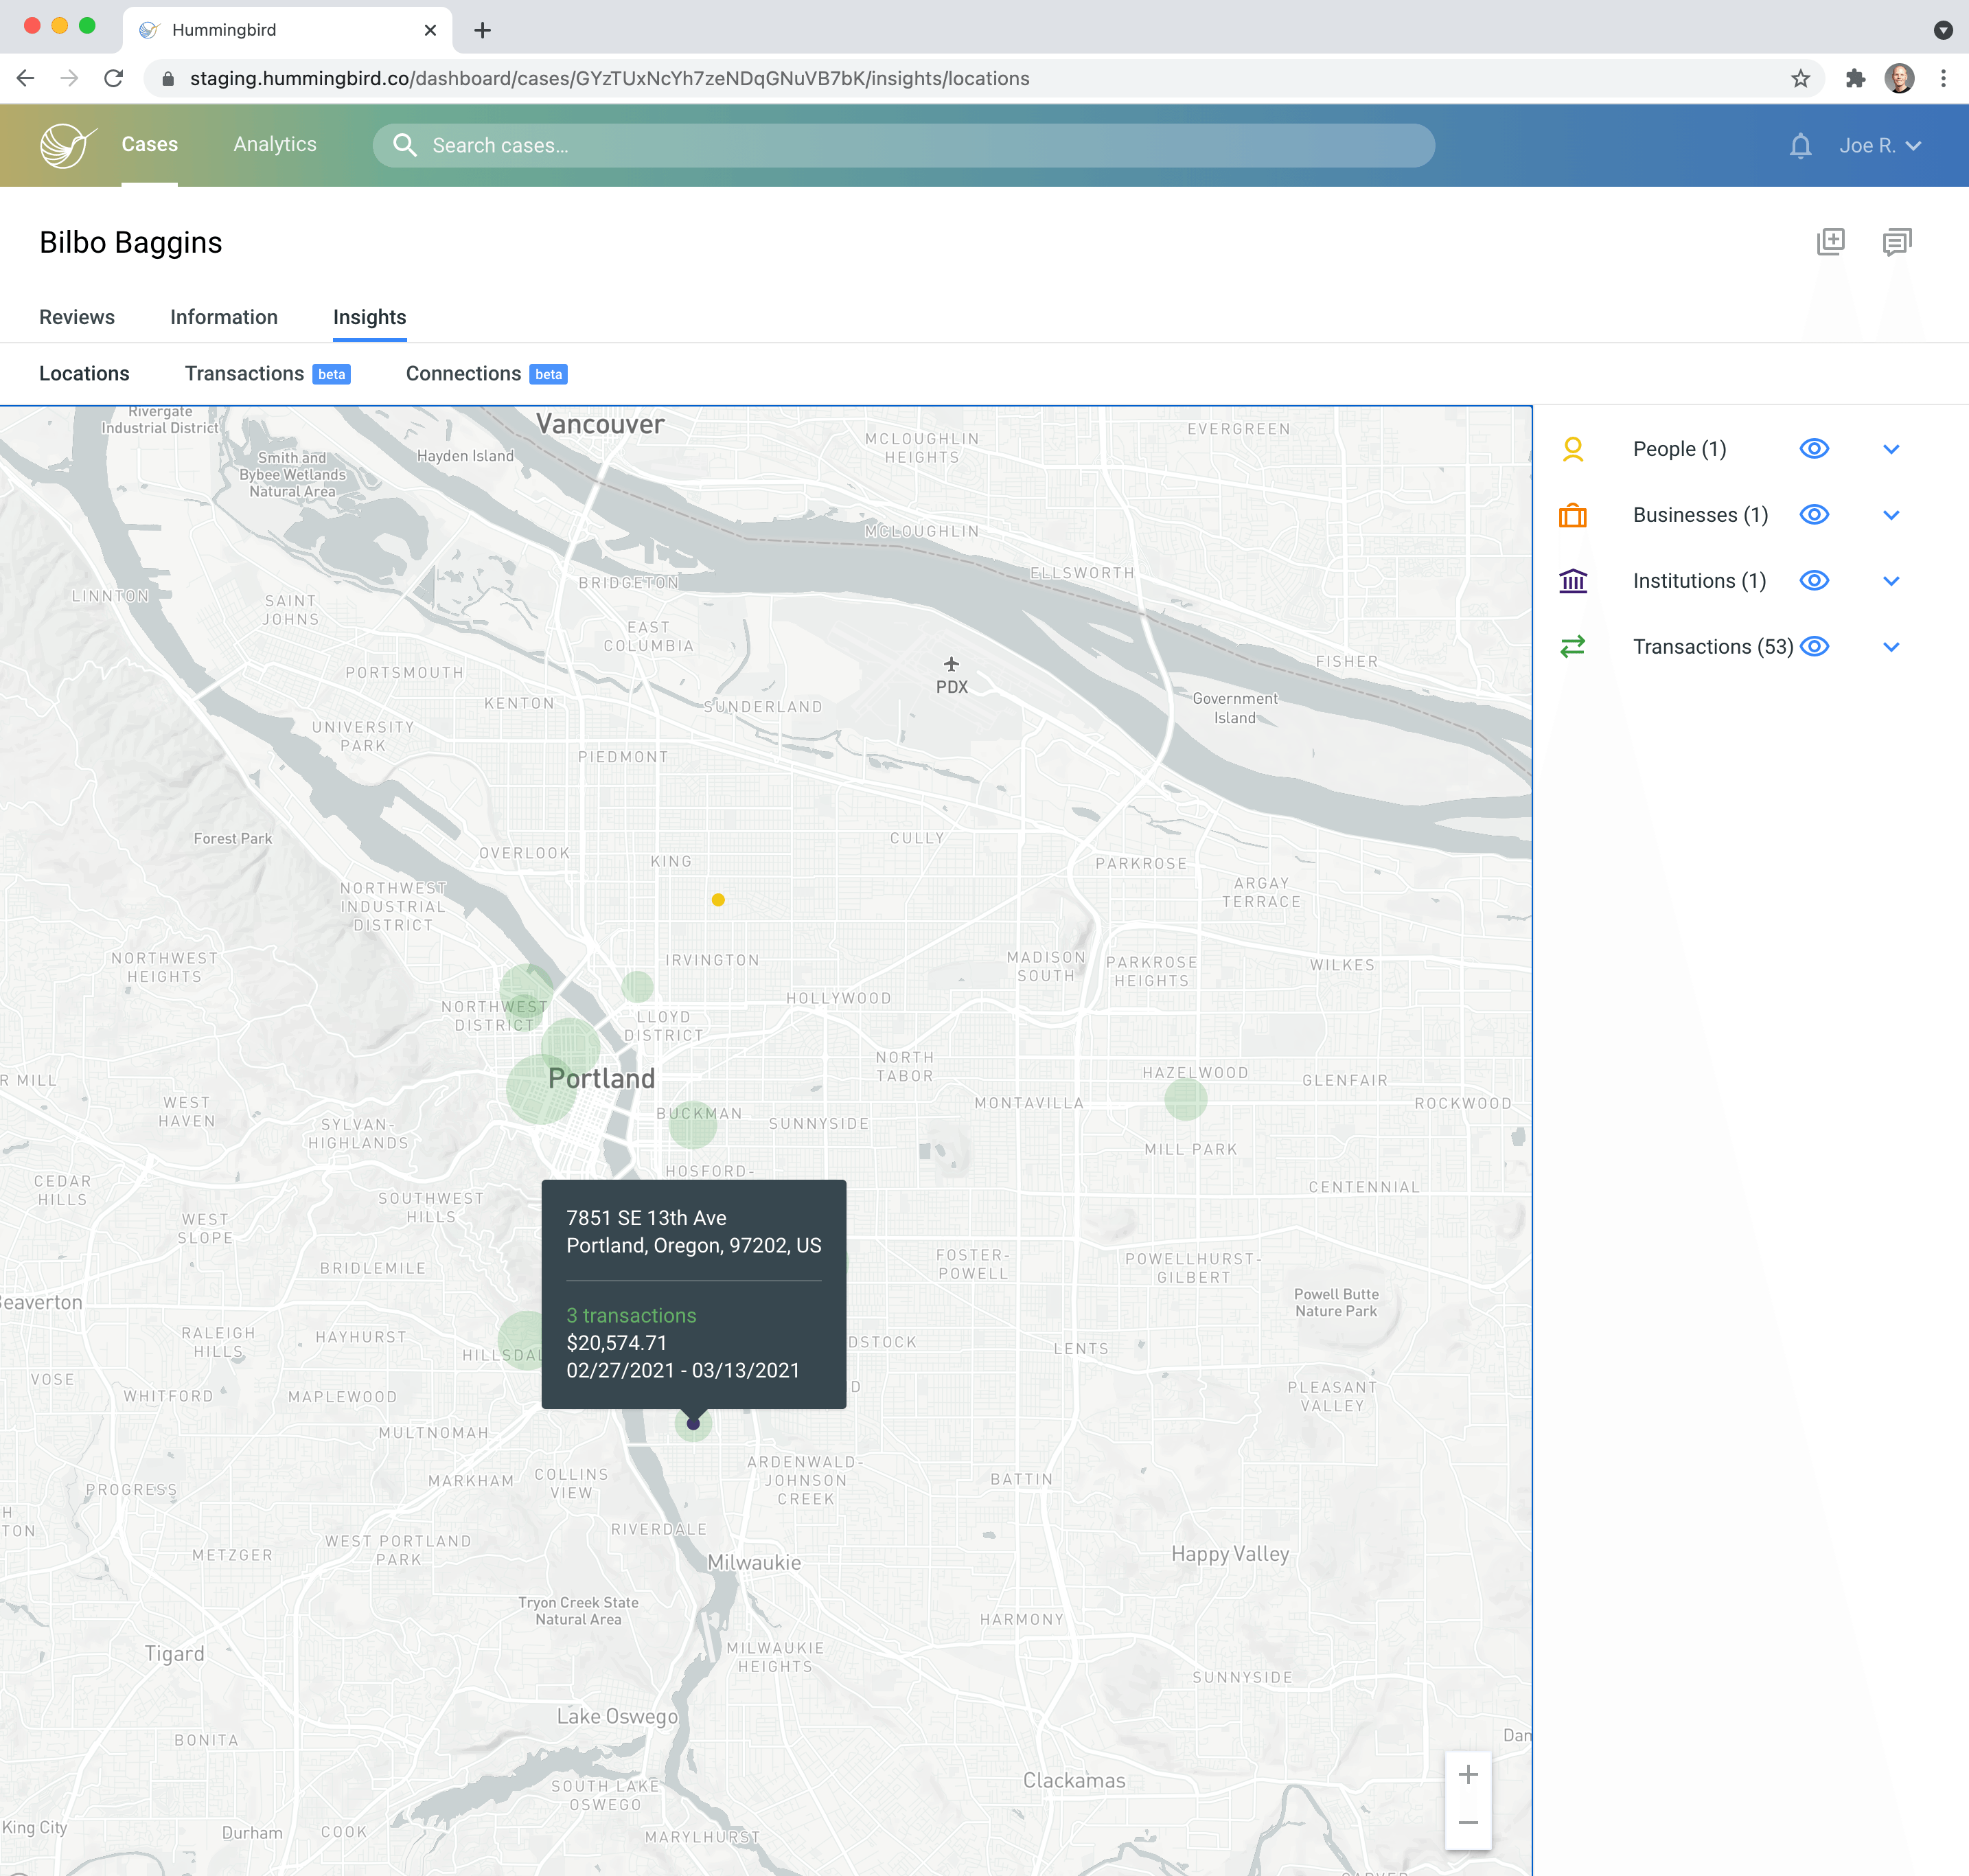 Image shows Hummingboard dashboard with map